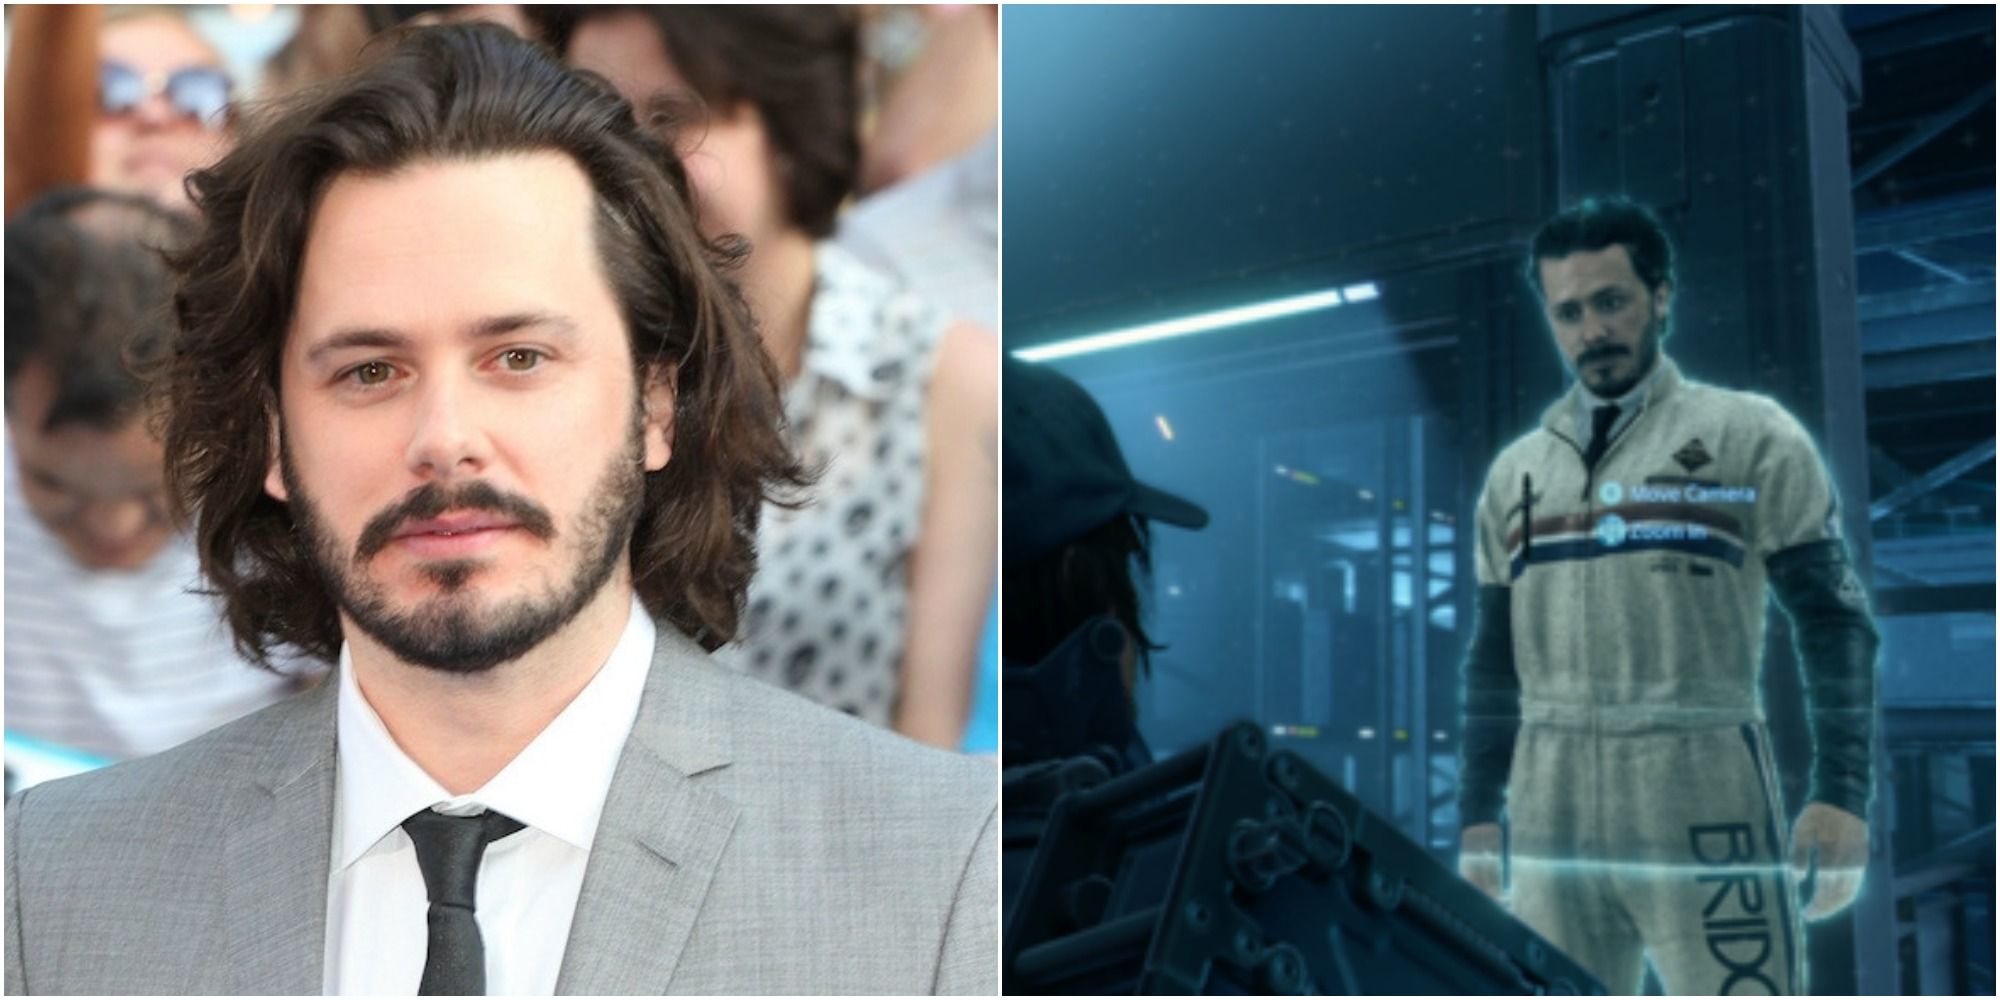 DS Edgar Wright Cameo real portrait and in game hologram